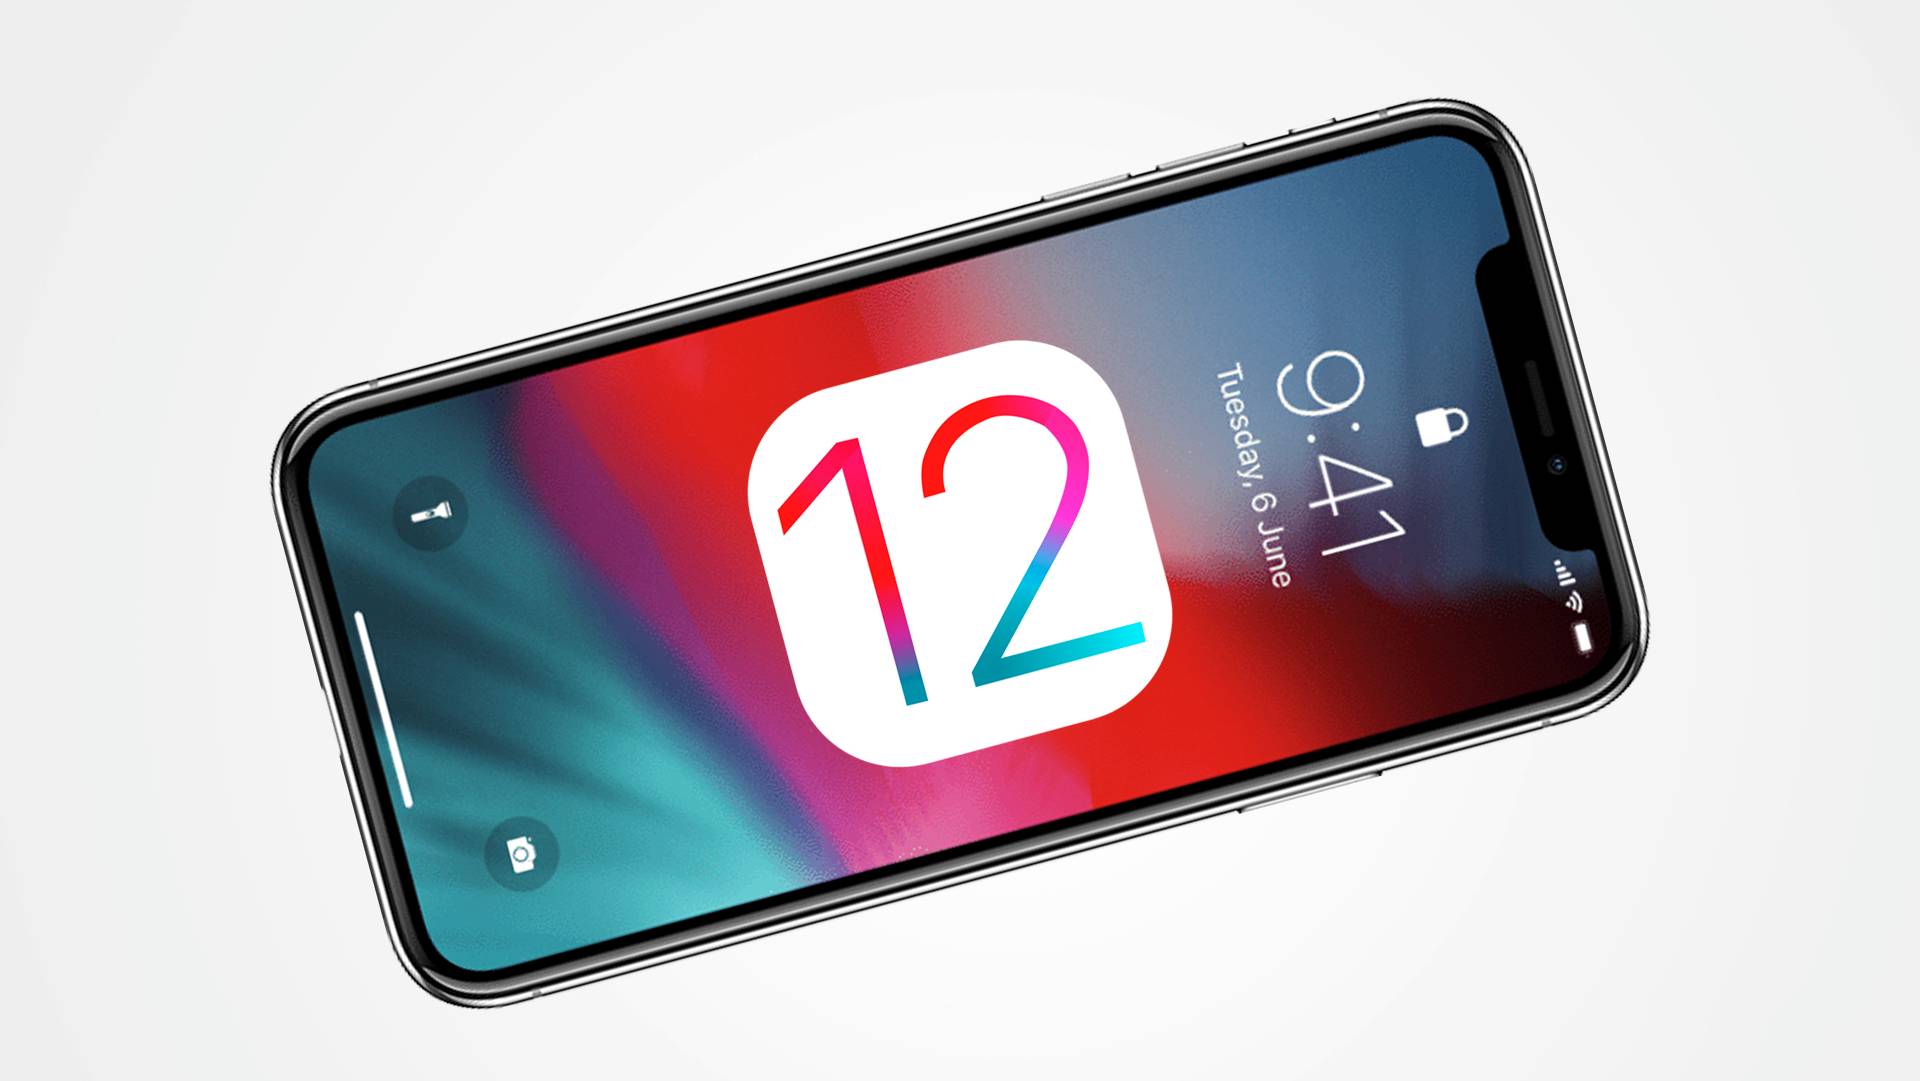 iOS 12 is Used on Many iPhones, iPads, iPod Touches